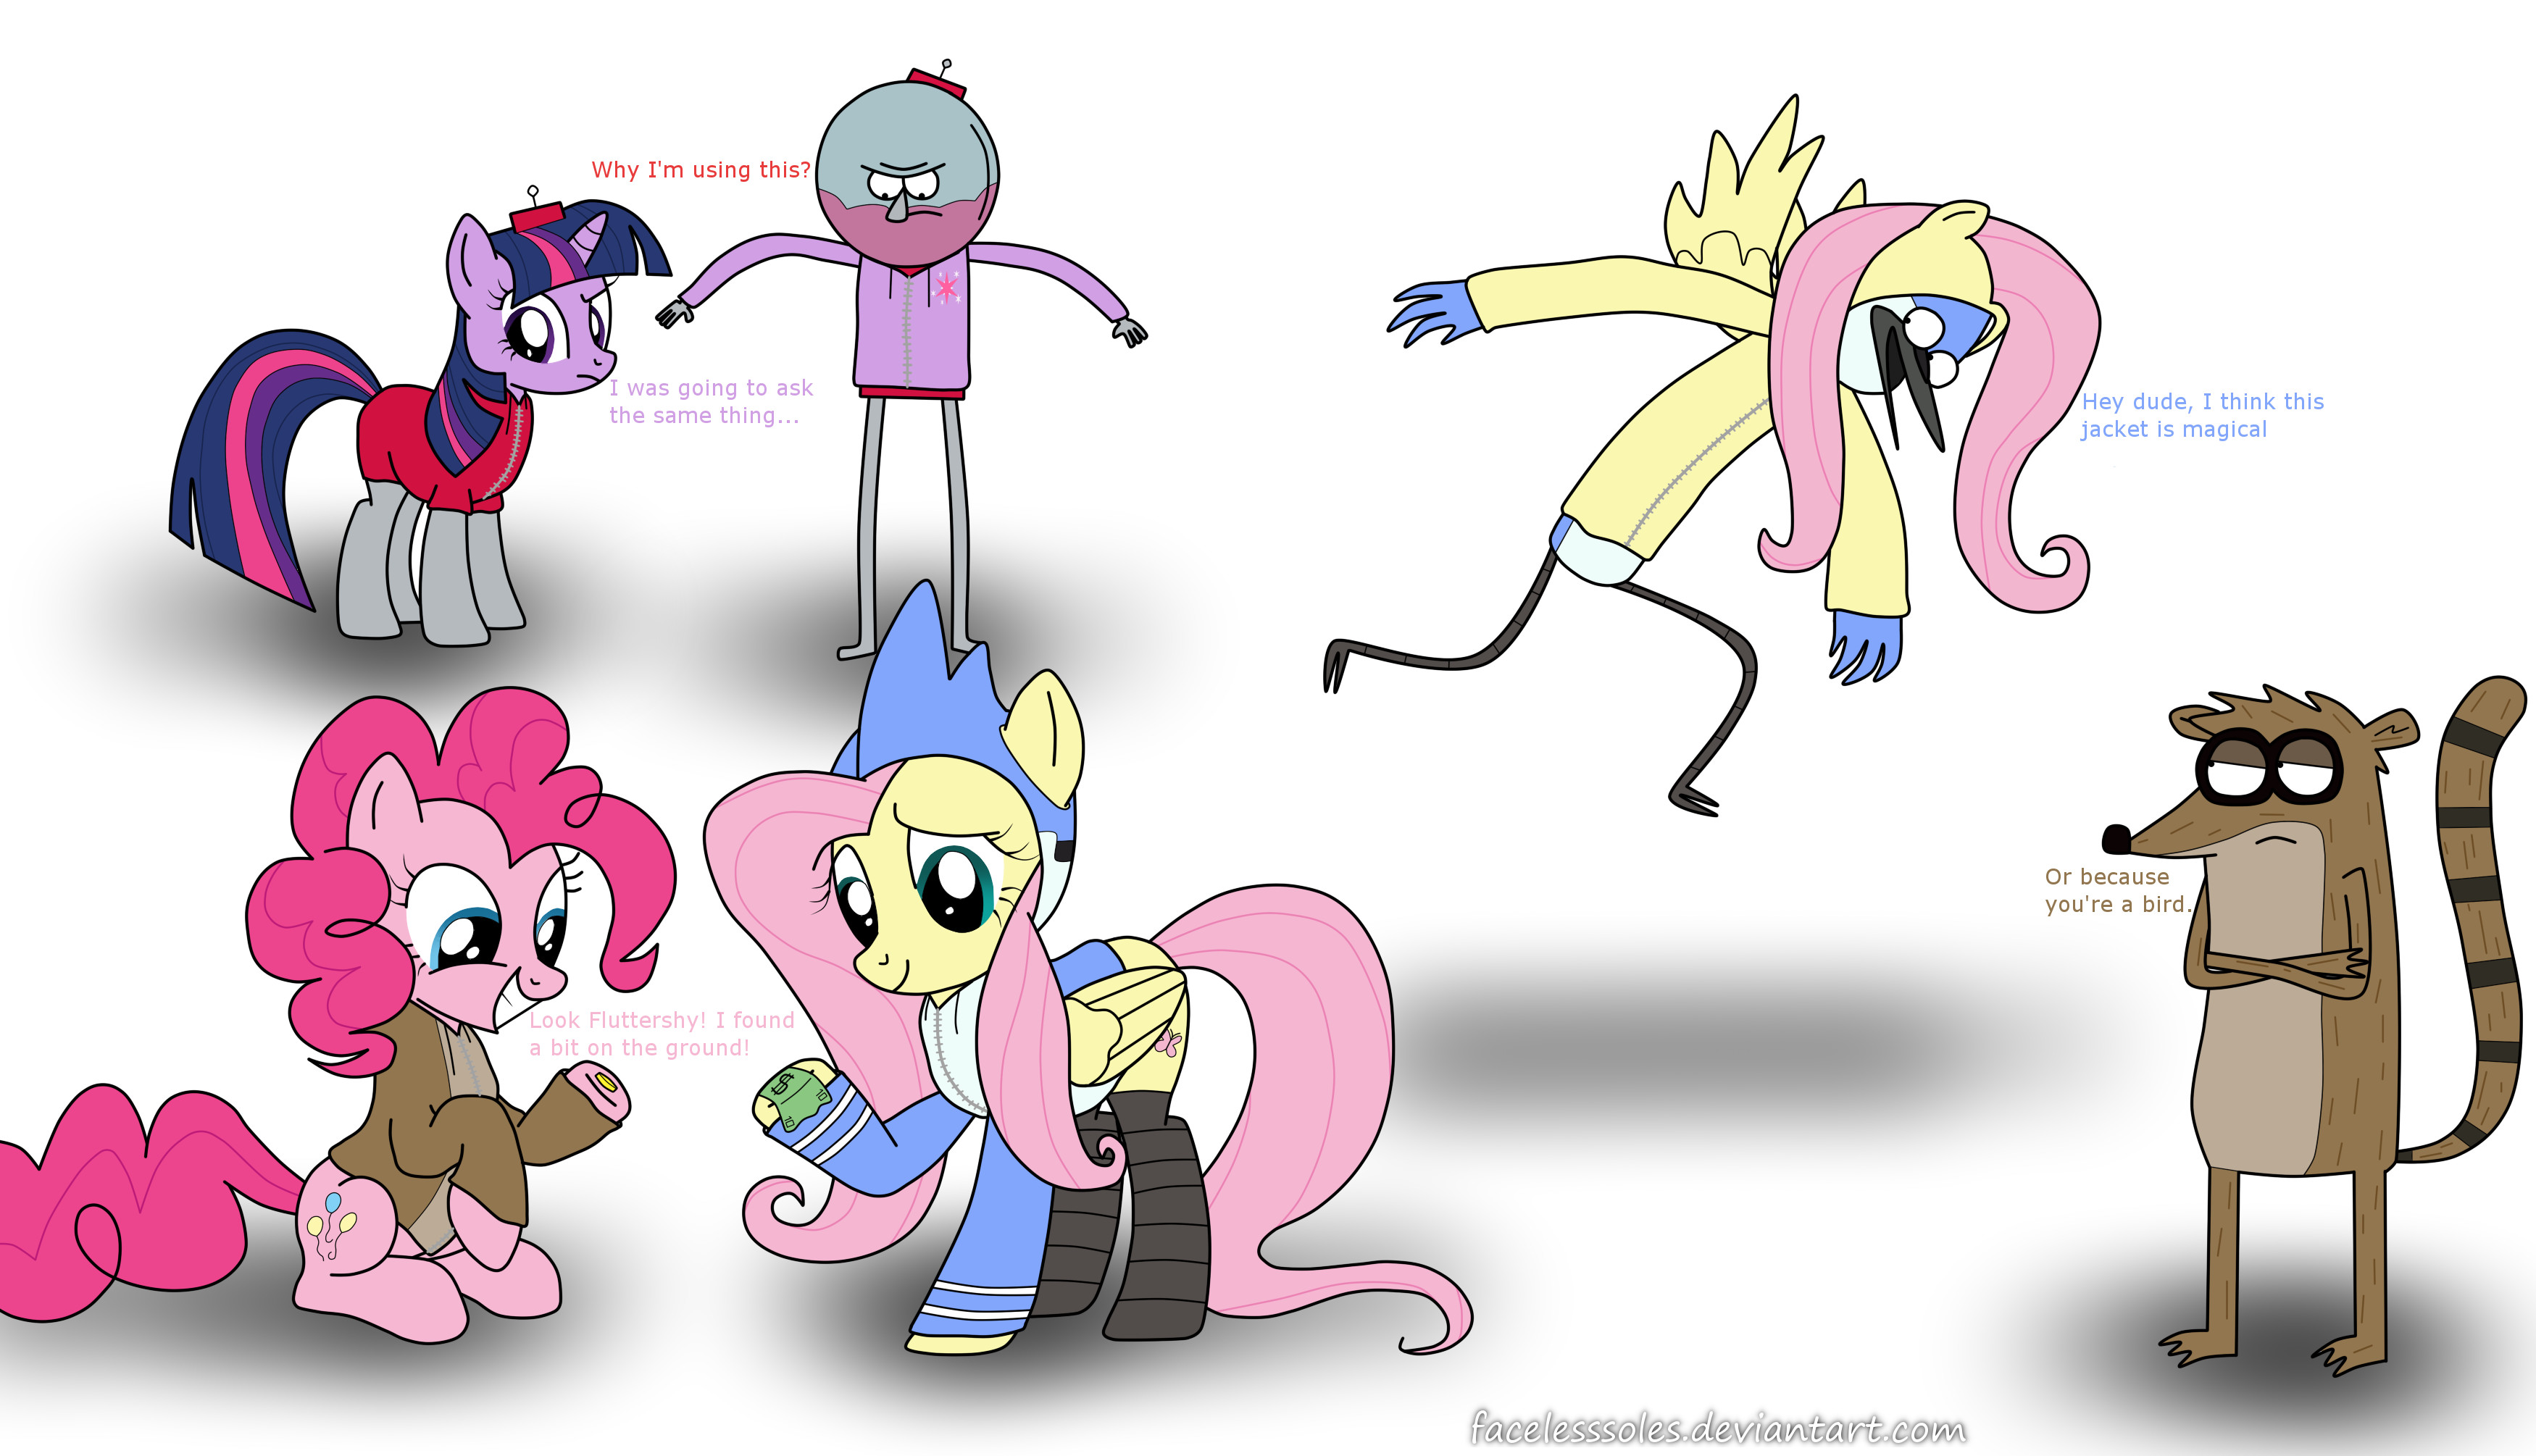 3500x2010 MLP and Regular Show by FacelessSoles MLP and Regular Show by FacelessSoles